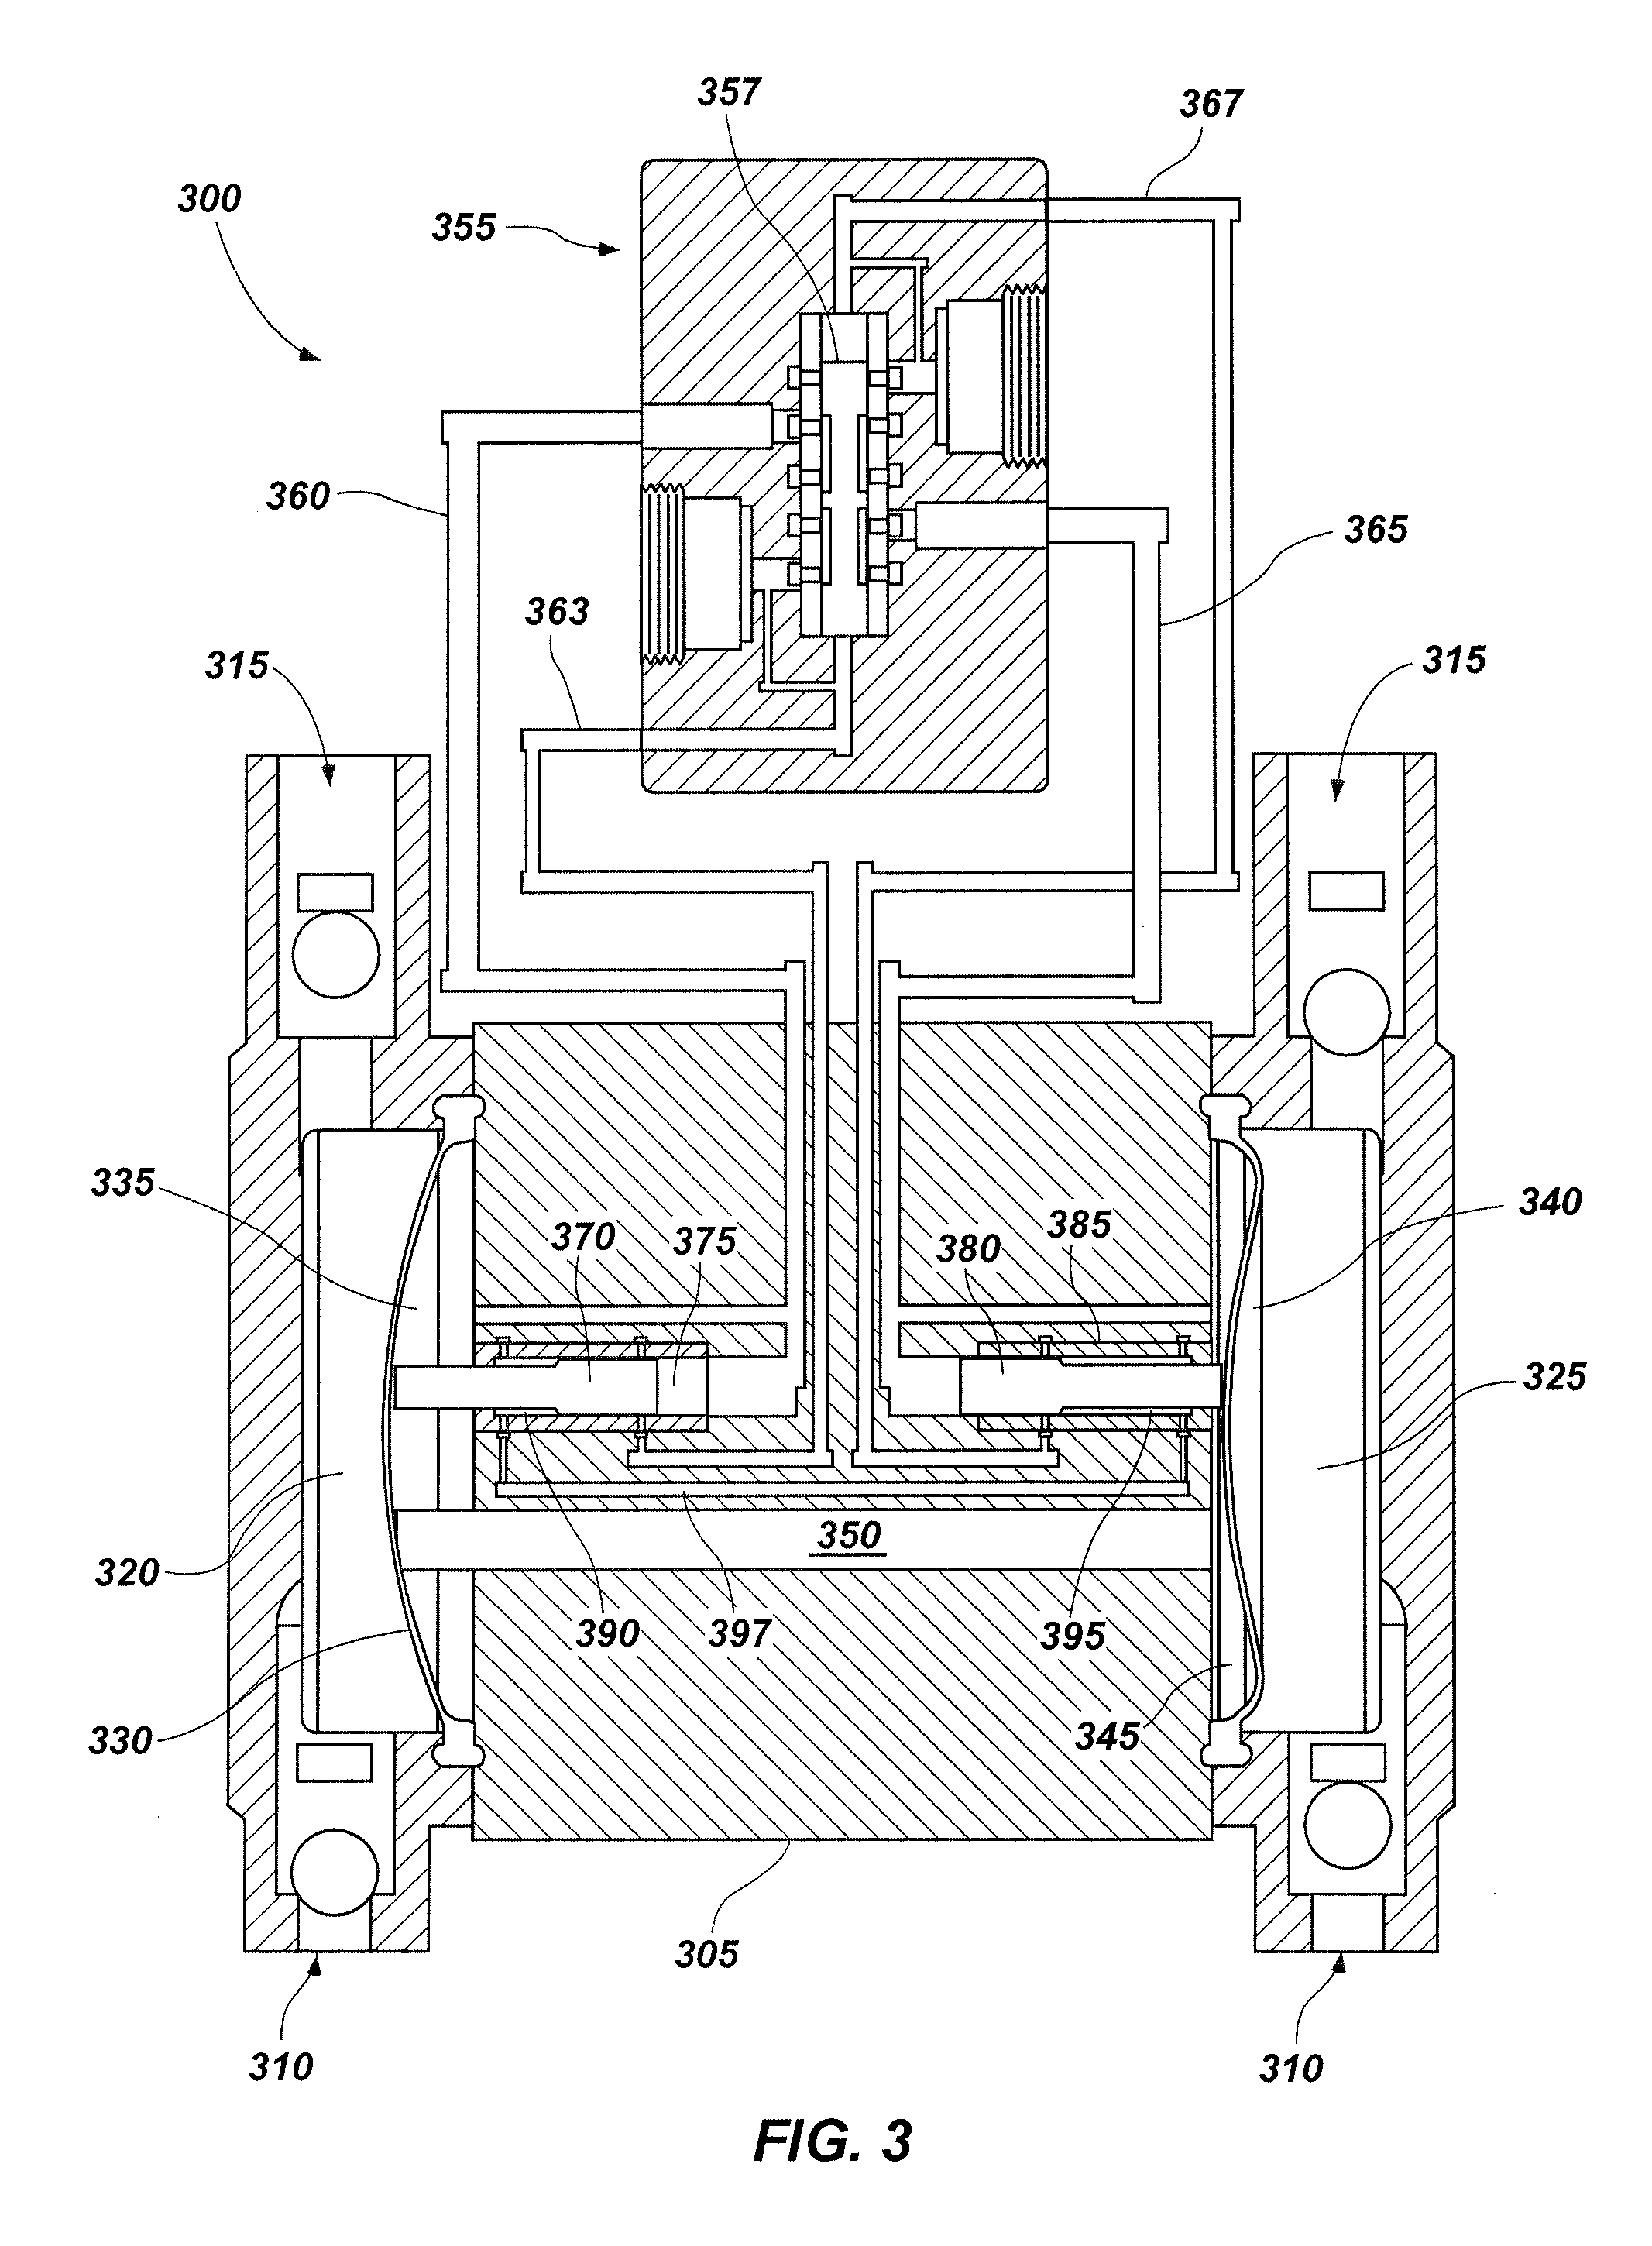 Piston systems having a flow path between piston chambers, pumps including a flow path between piston chambers, and methods of driving pumps